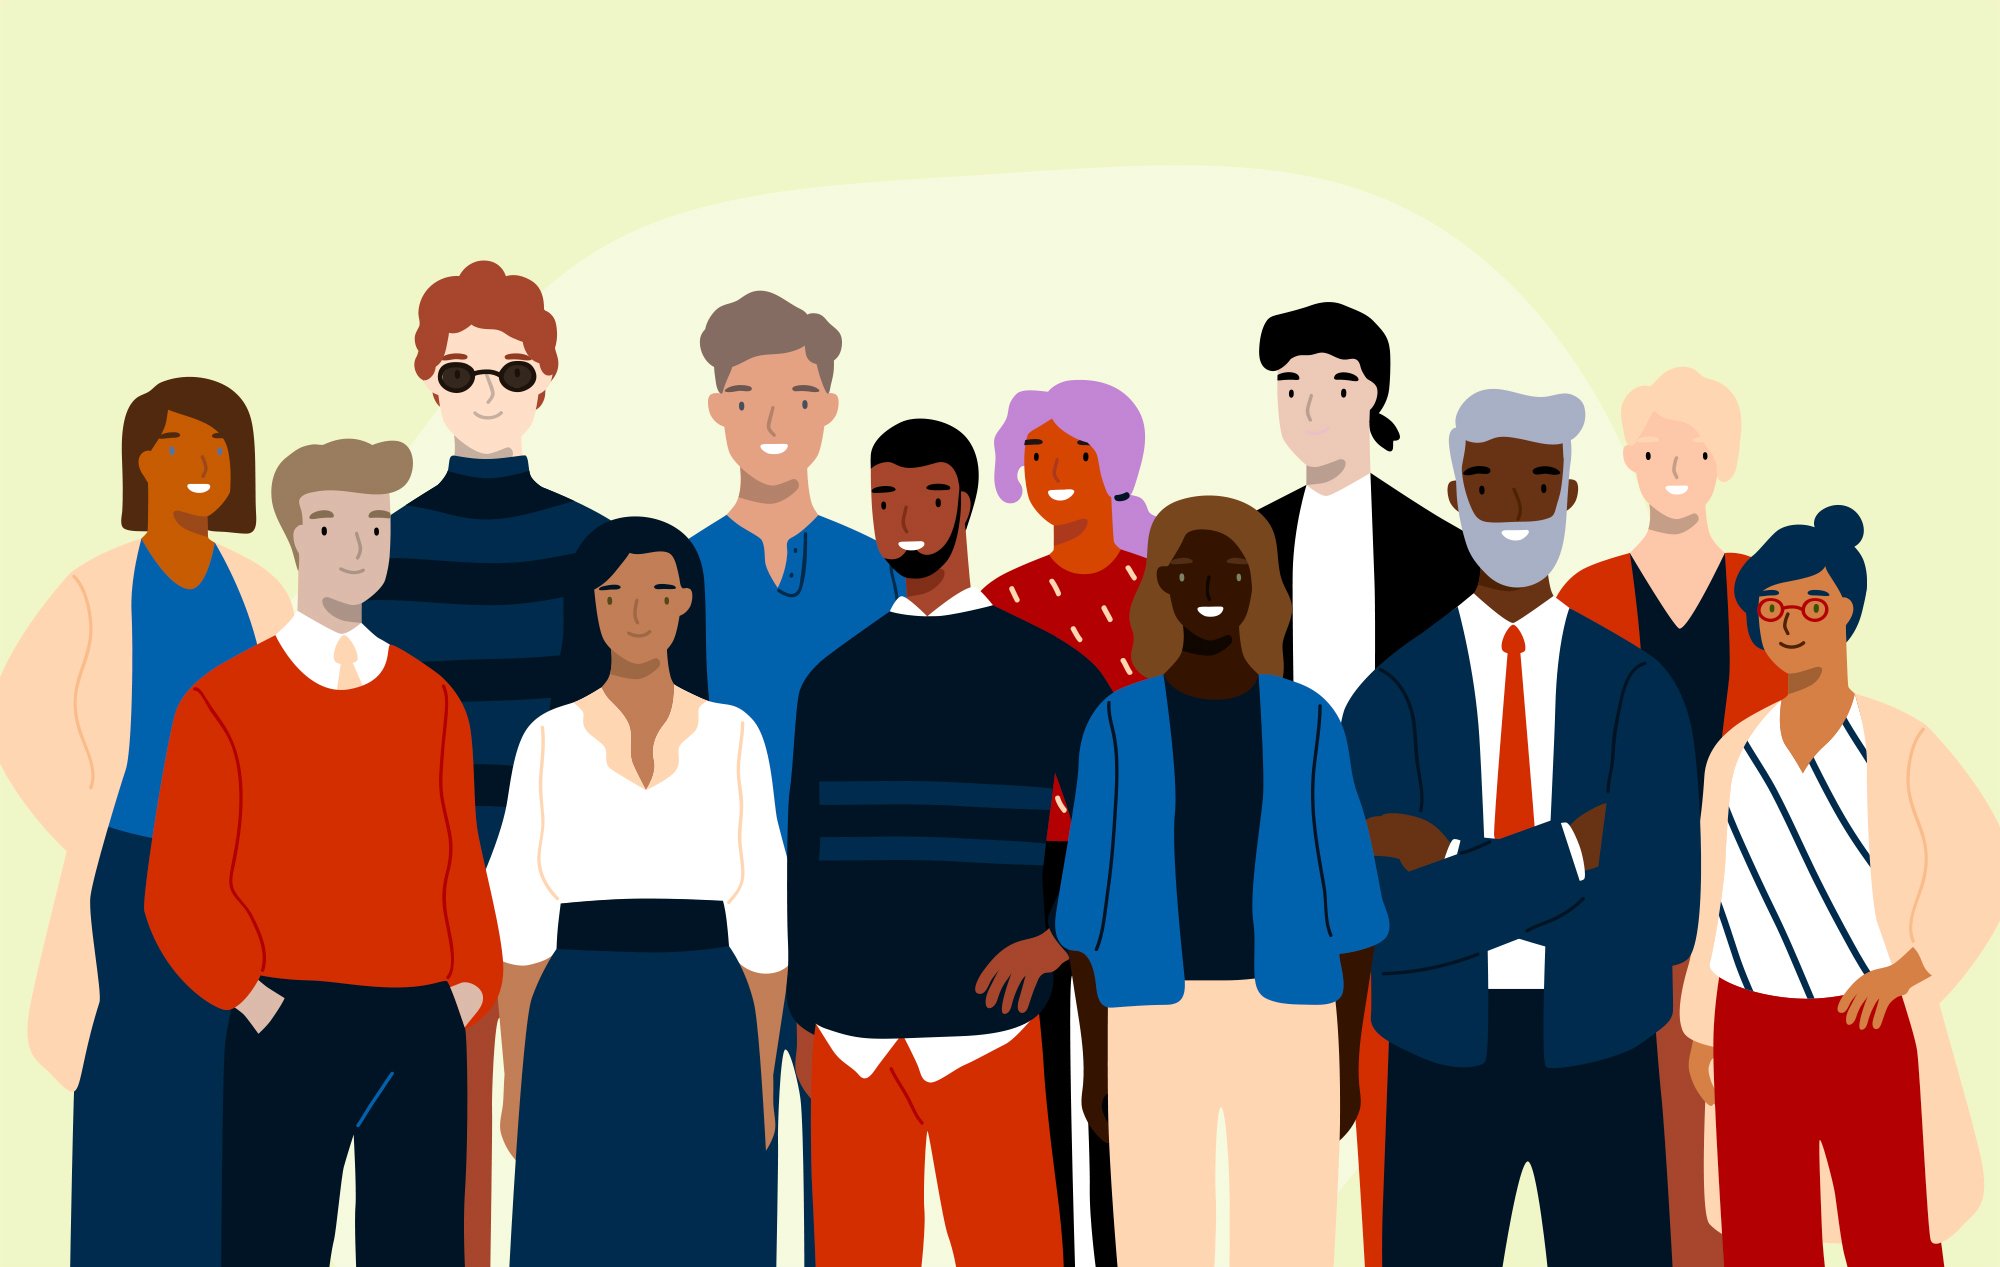 Illustration of a group of people standing together and smiling.